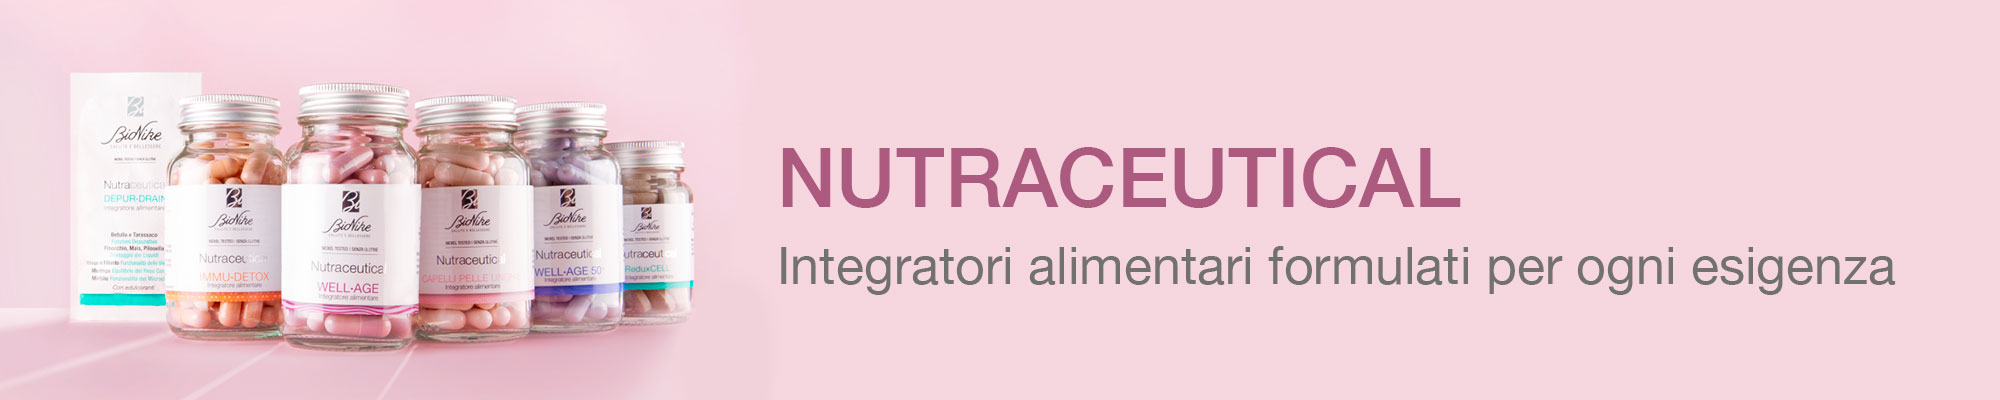 bionike nutraceutical banner